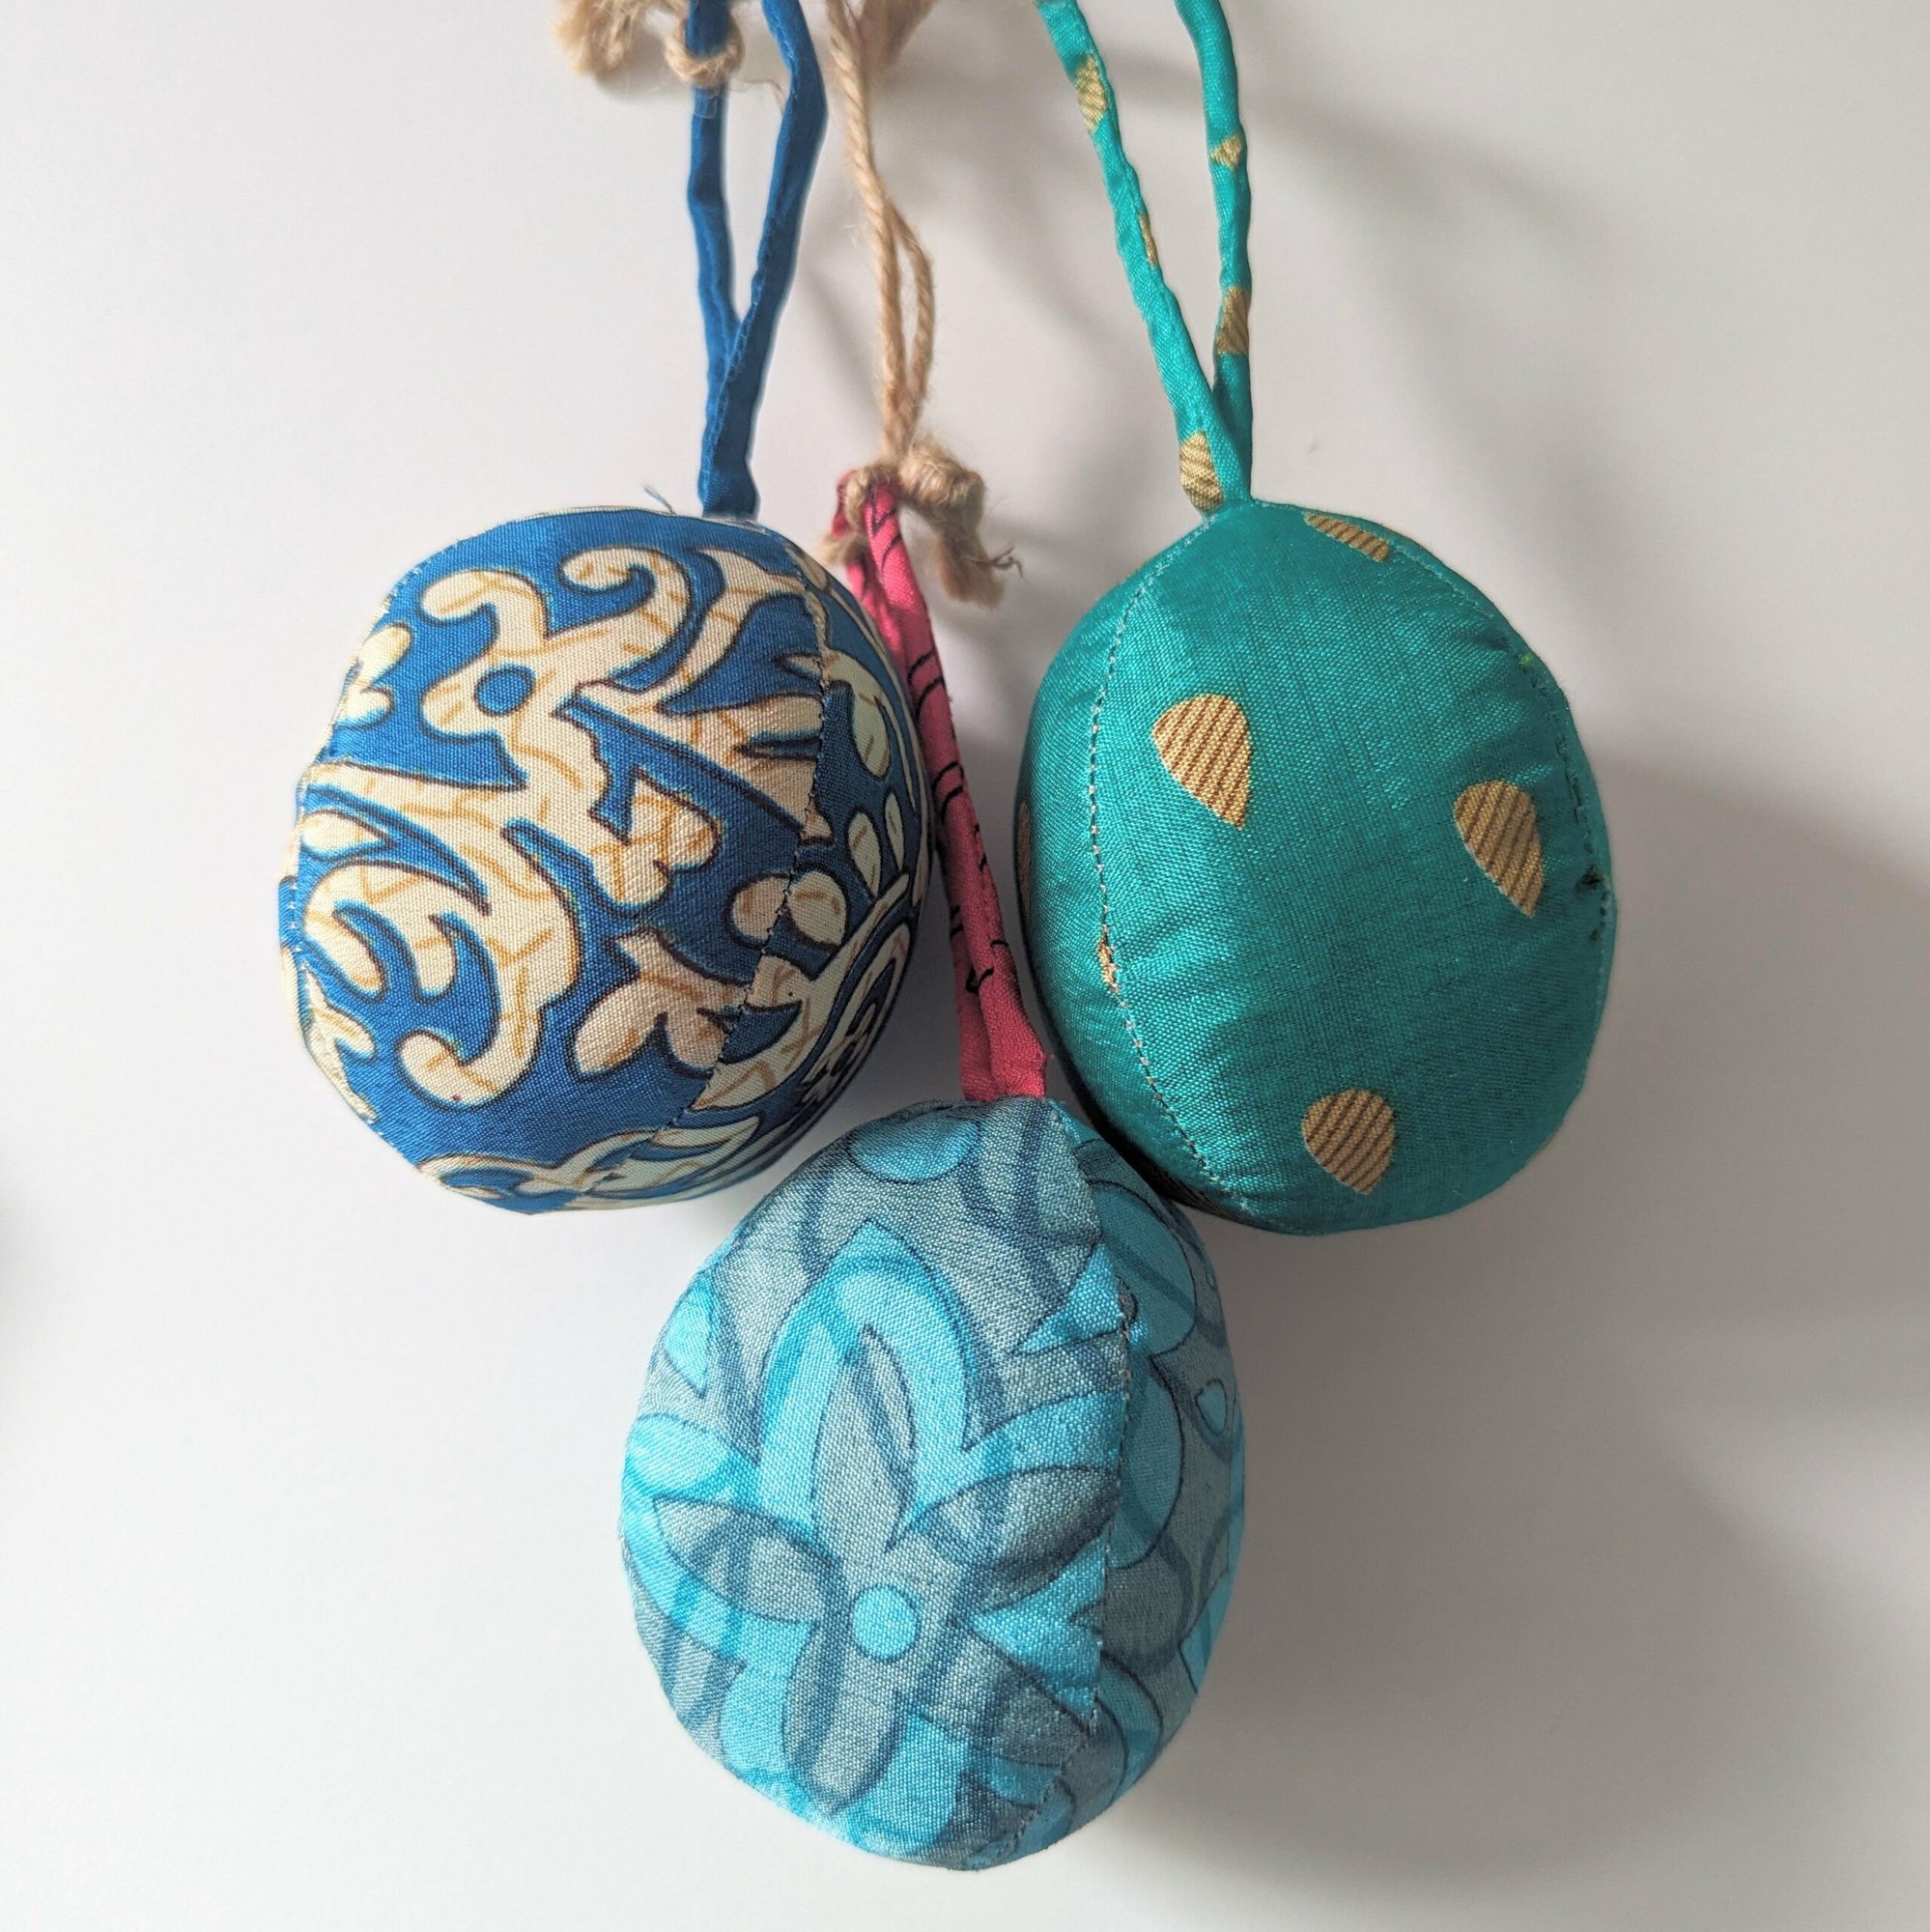 Hanging Egg Decorations 3 Pack - Turquoises